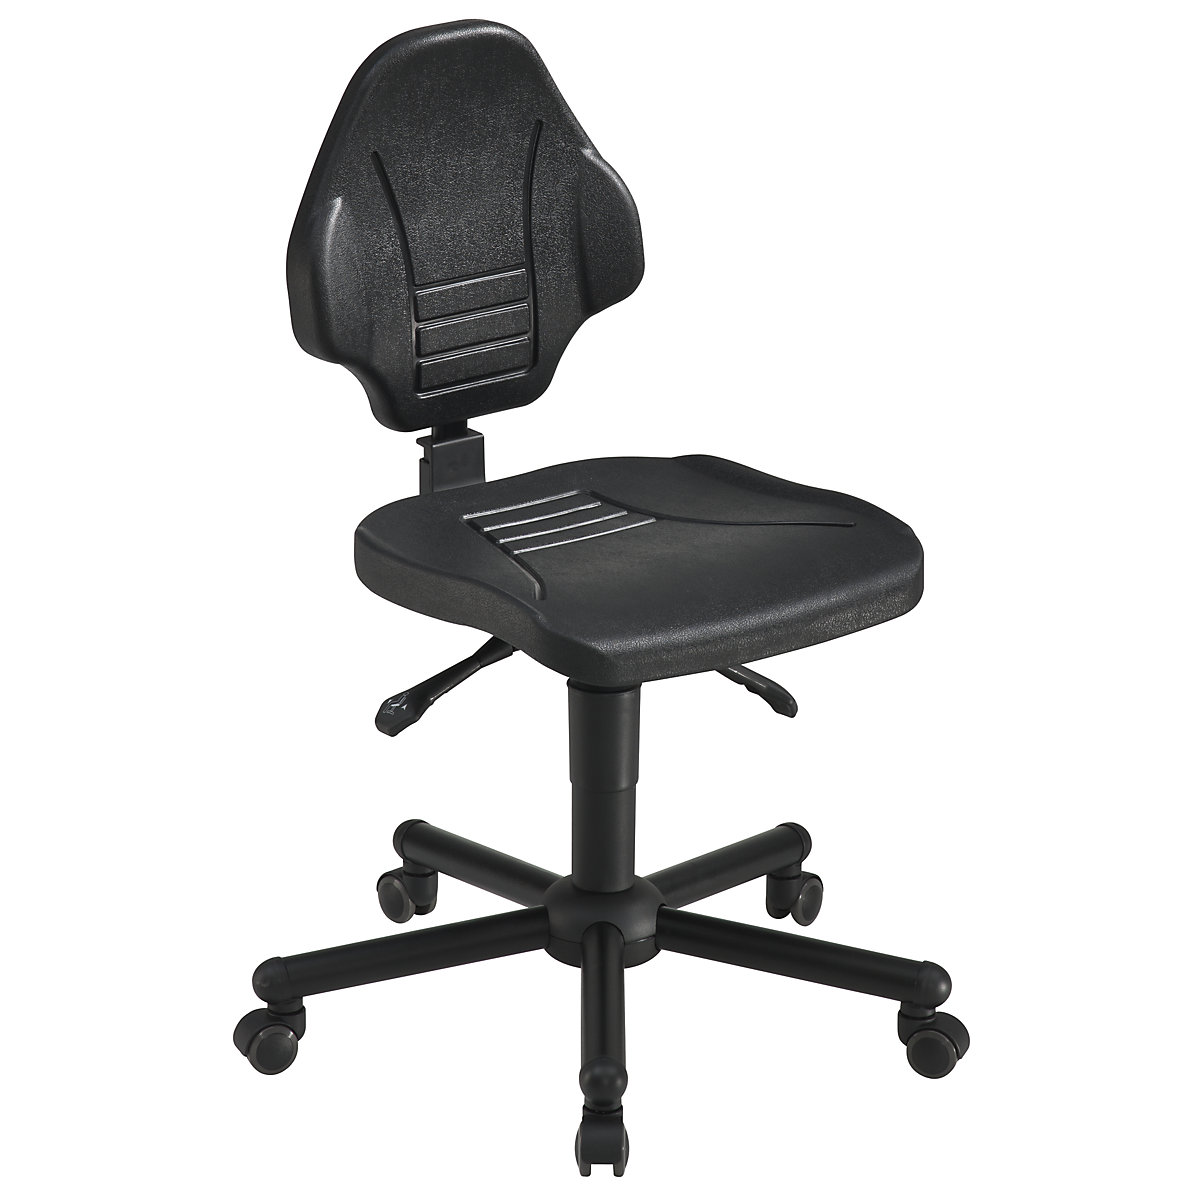 Heavy duty industrial swivel chair – meychair, max. load 160 kg, with castors, height adjustment range 480 – 610 mm-2